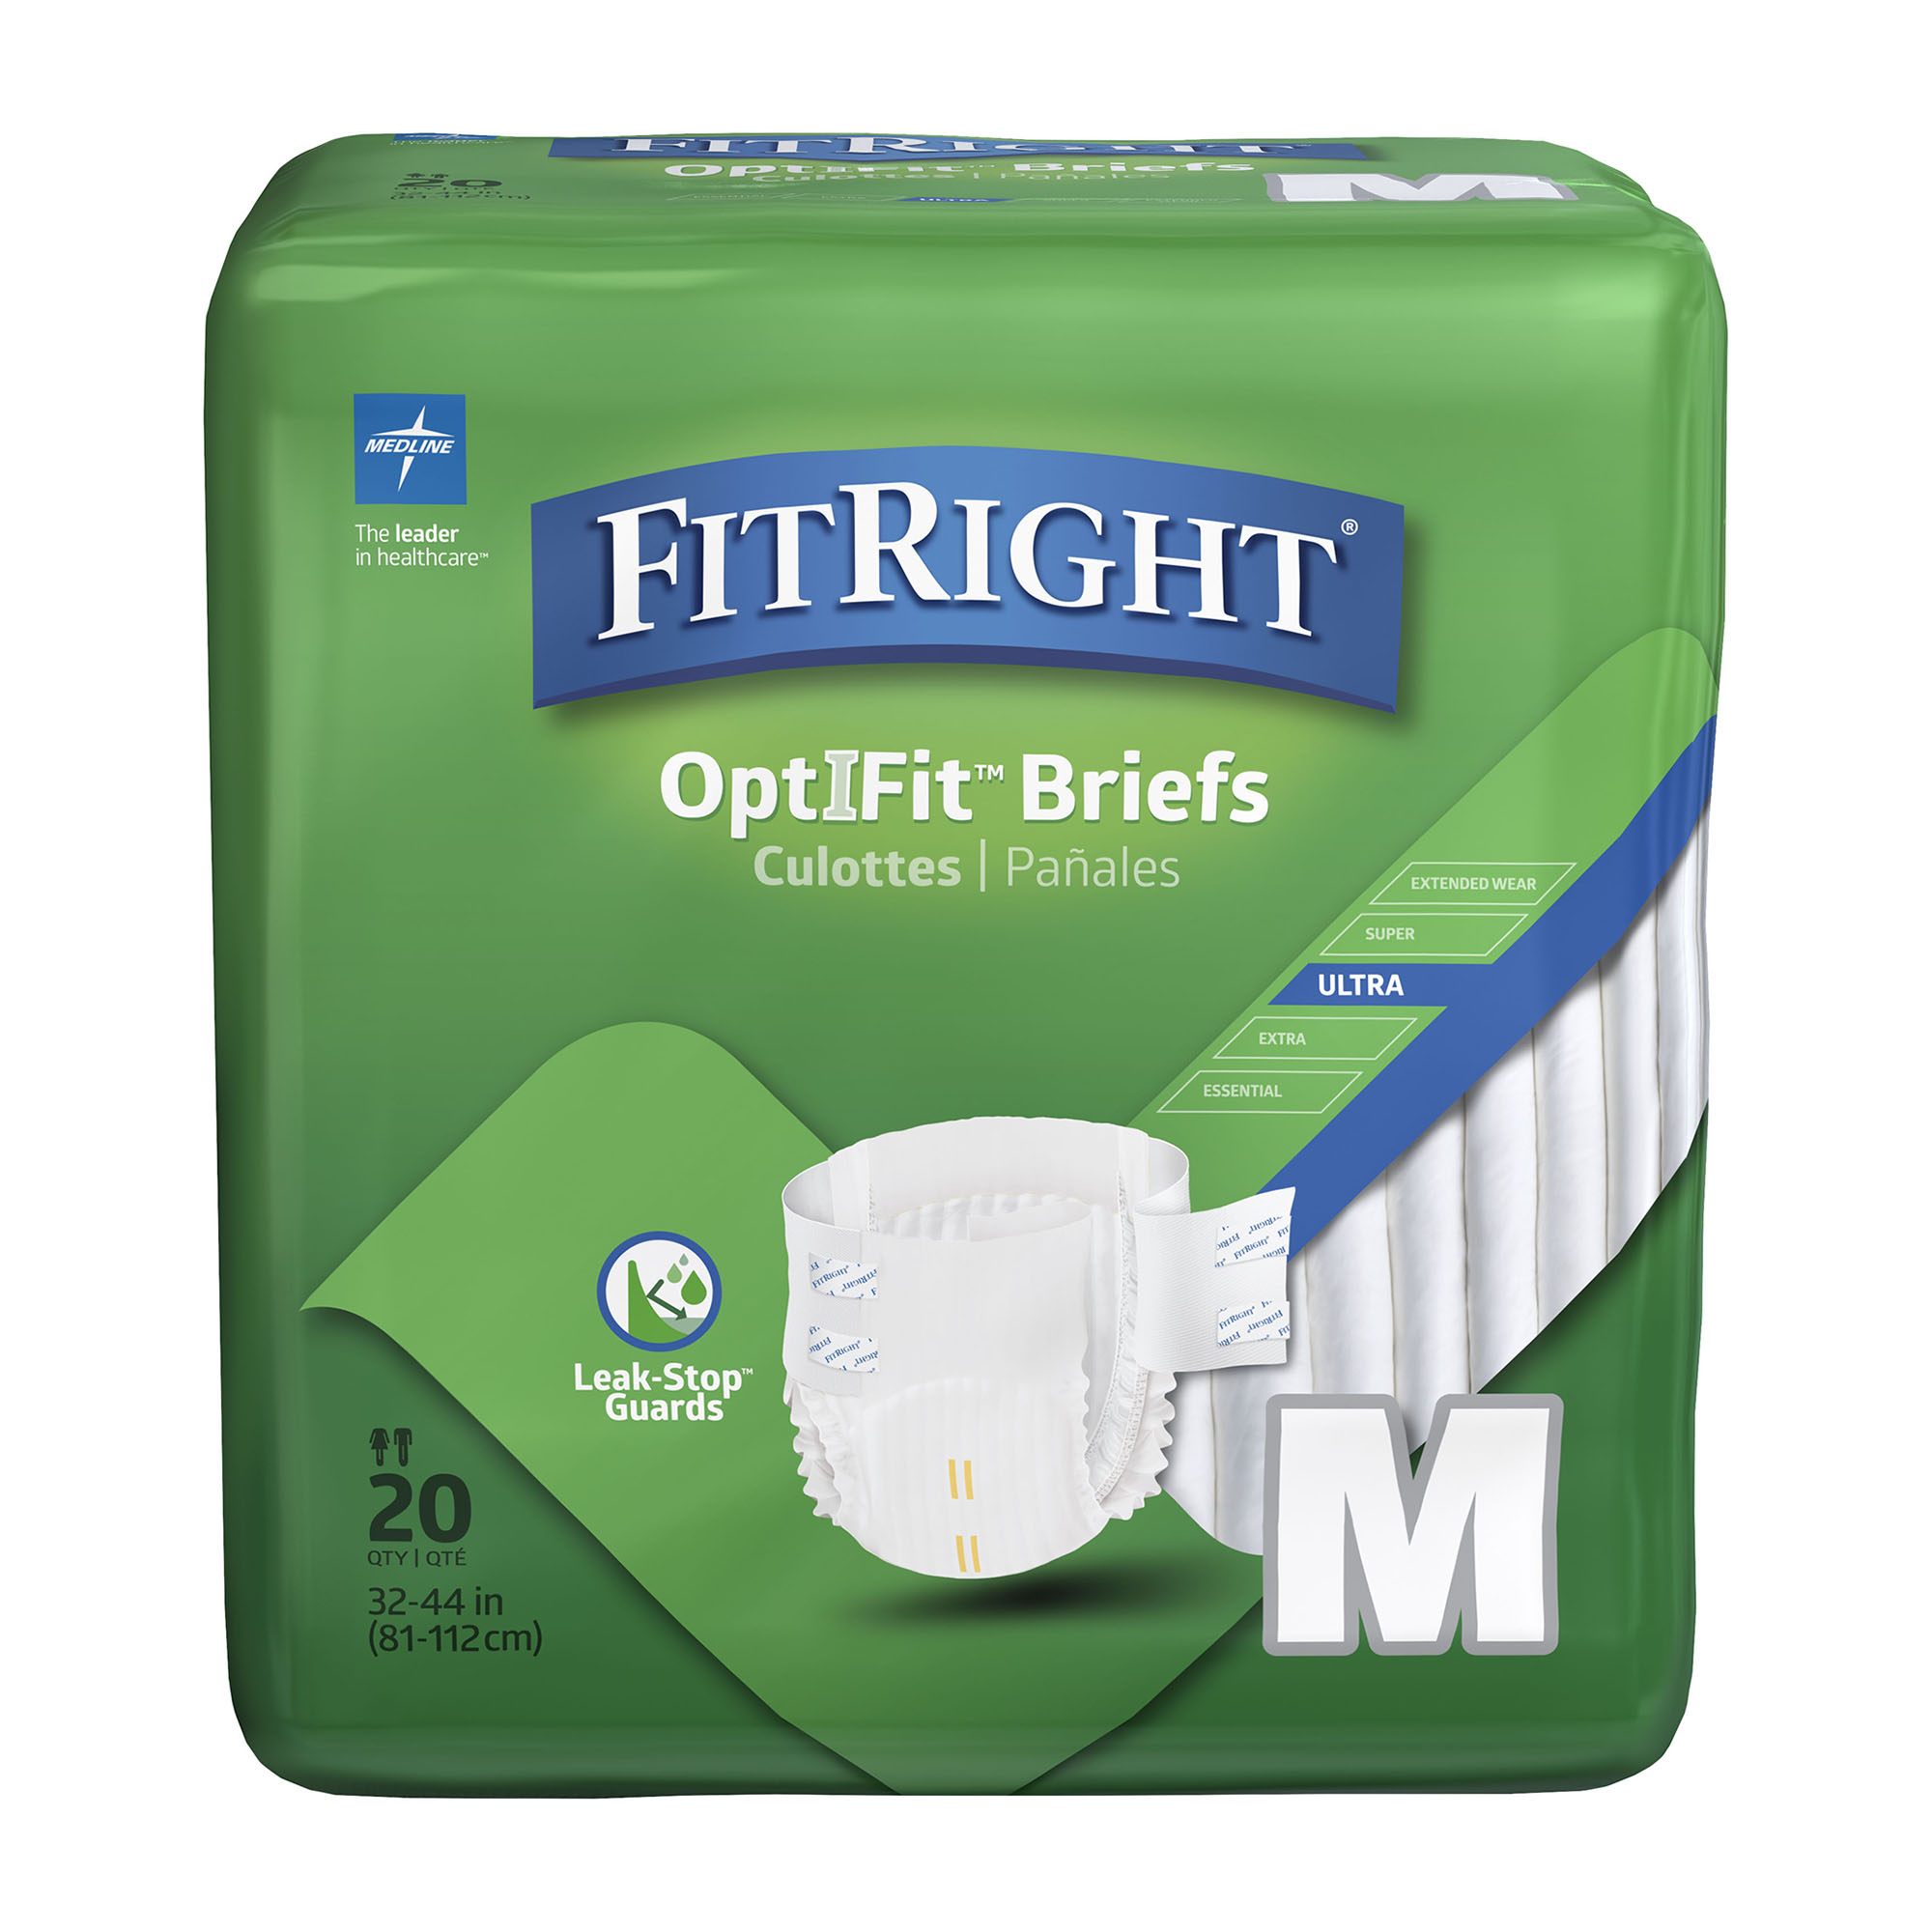 FitRight OptiFit Briefs, Ultra Absorbency, Disposable Adult Briefs with Tabs, Medium, 32"-44", 20 Count - image 1 of 6